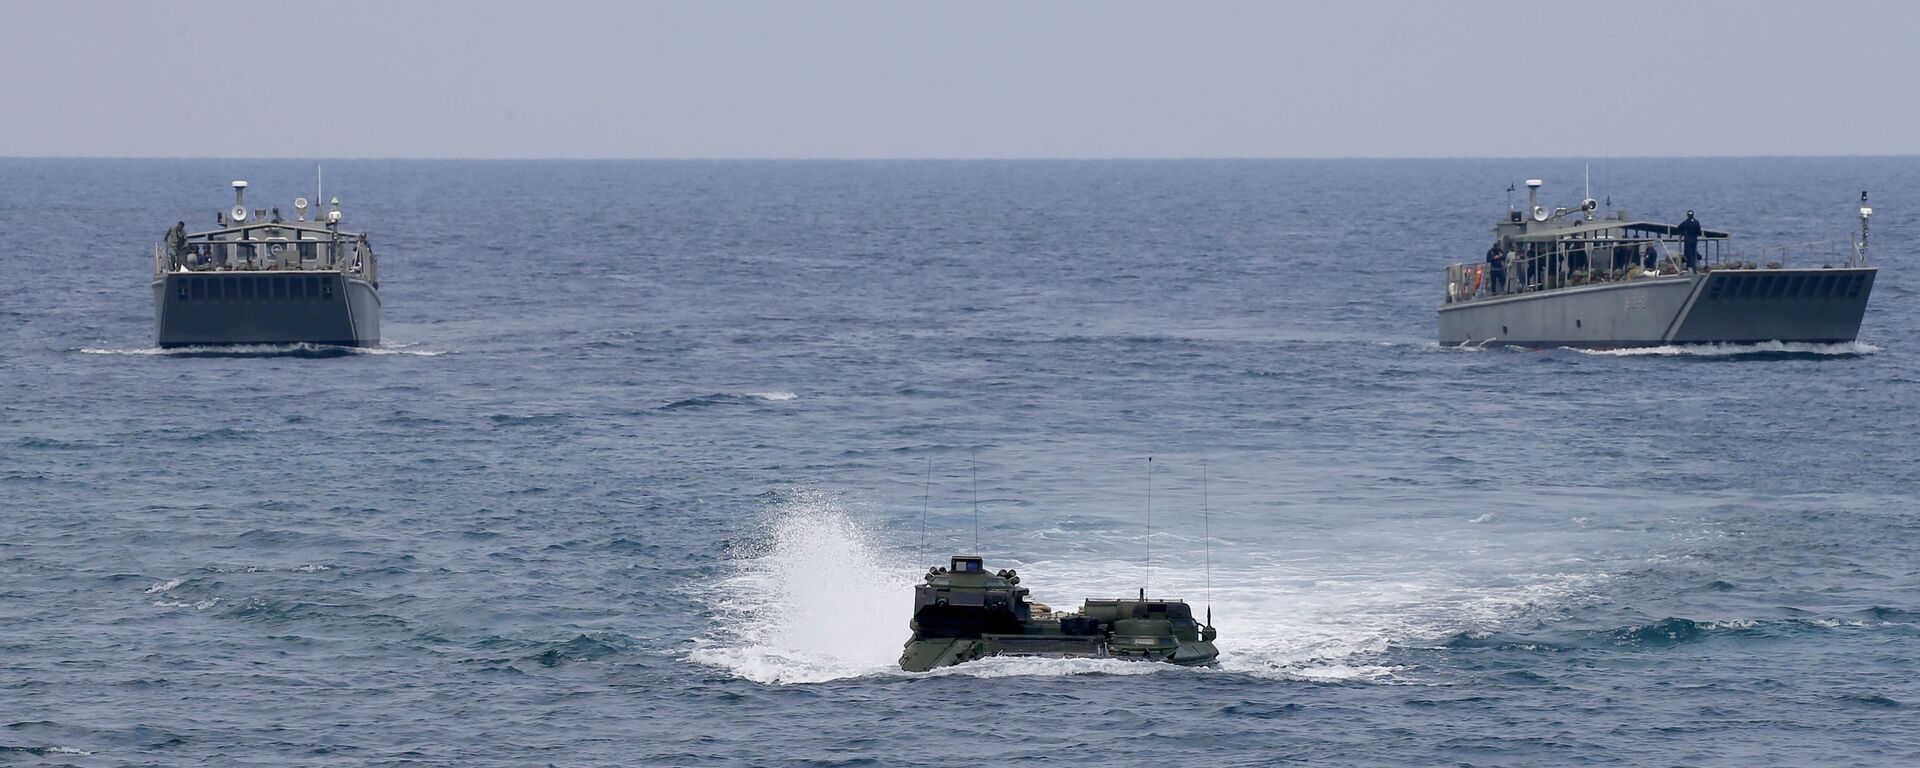 A U.S. Marine Amphibious Assault Vehicle (AAV), with both Philippine and U.S. Marines on board, prepares to storm the beach during an amphibious landing exercise at the two-week joint U.S.-Philippines military exercise dubbed Balikatan 34-2018 Wednesday, May 9, 2018 at the Naval Education and Training Command in Zambales province which is facing the South China Sea in northwestern Philippines. About 8,000 U.S. and Philippine troops are taking part in the annual exercise, the largest since President Rodrigo Duterte came to power - Sputnik International, 1920, 05.04.2023